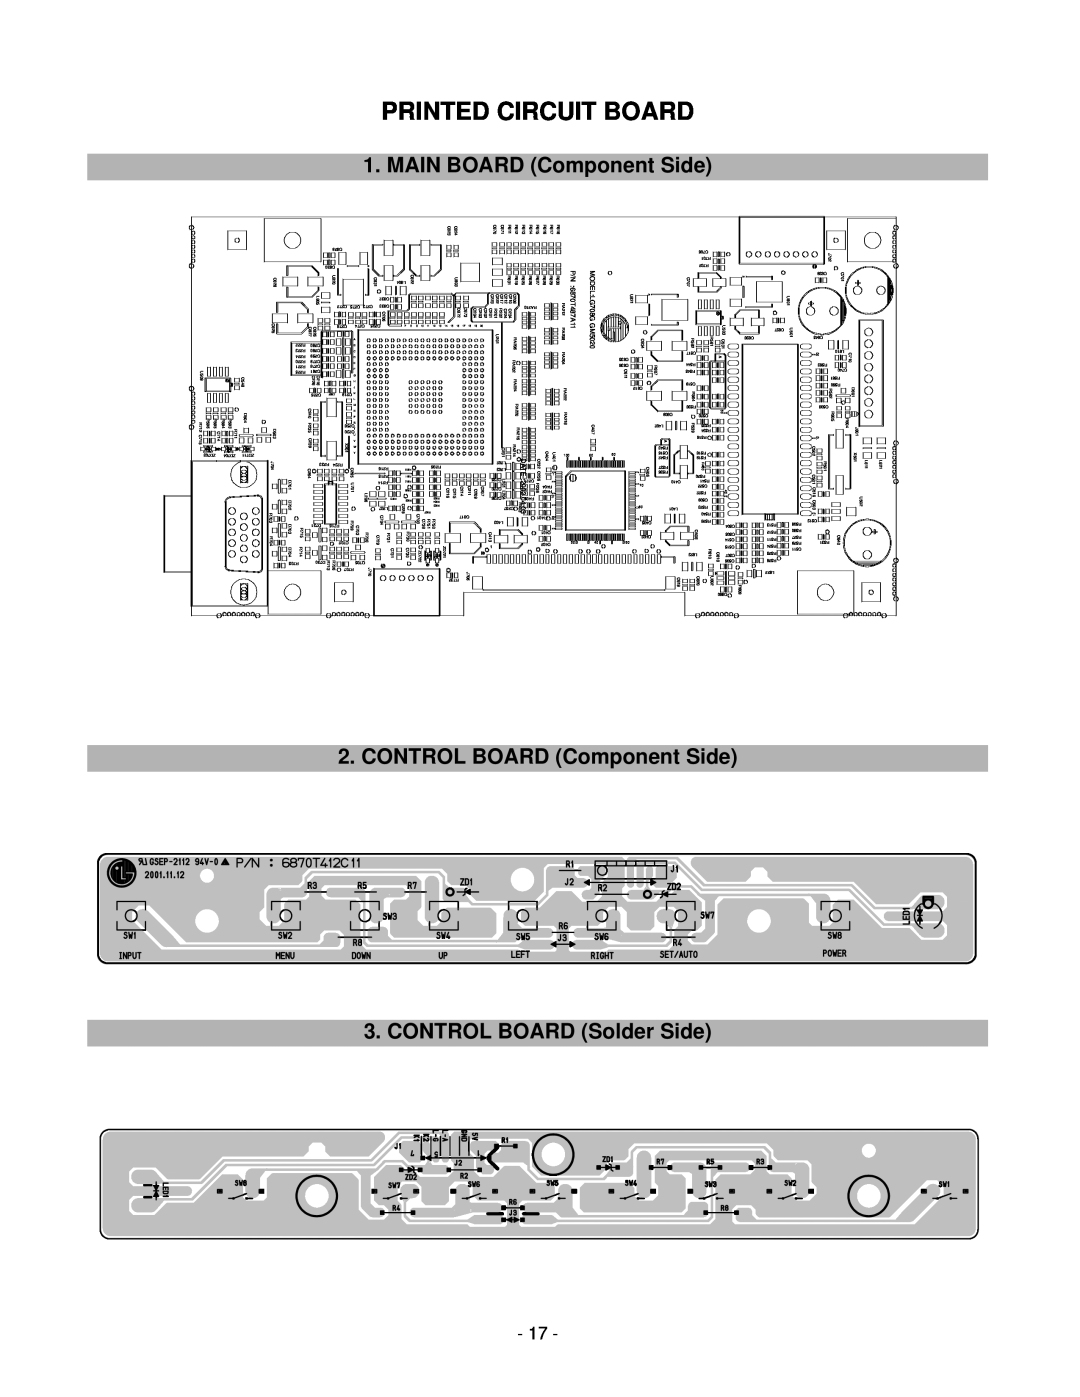 LG Electronics LCD 782LS Printed Circuit Board, MAIN BOARD Component Side, P/N 6870T487A11, Date, MODELLG708G GM5020 